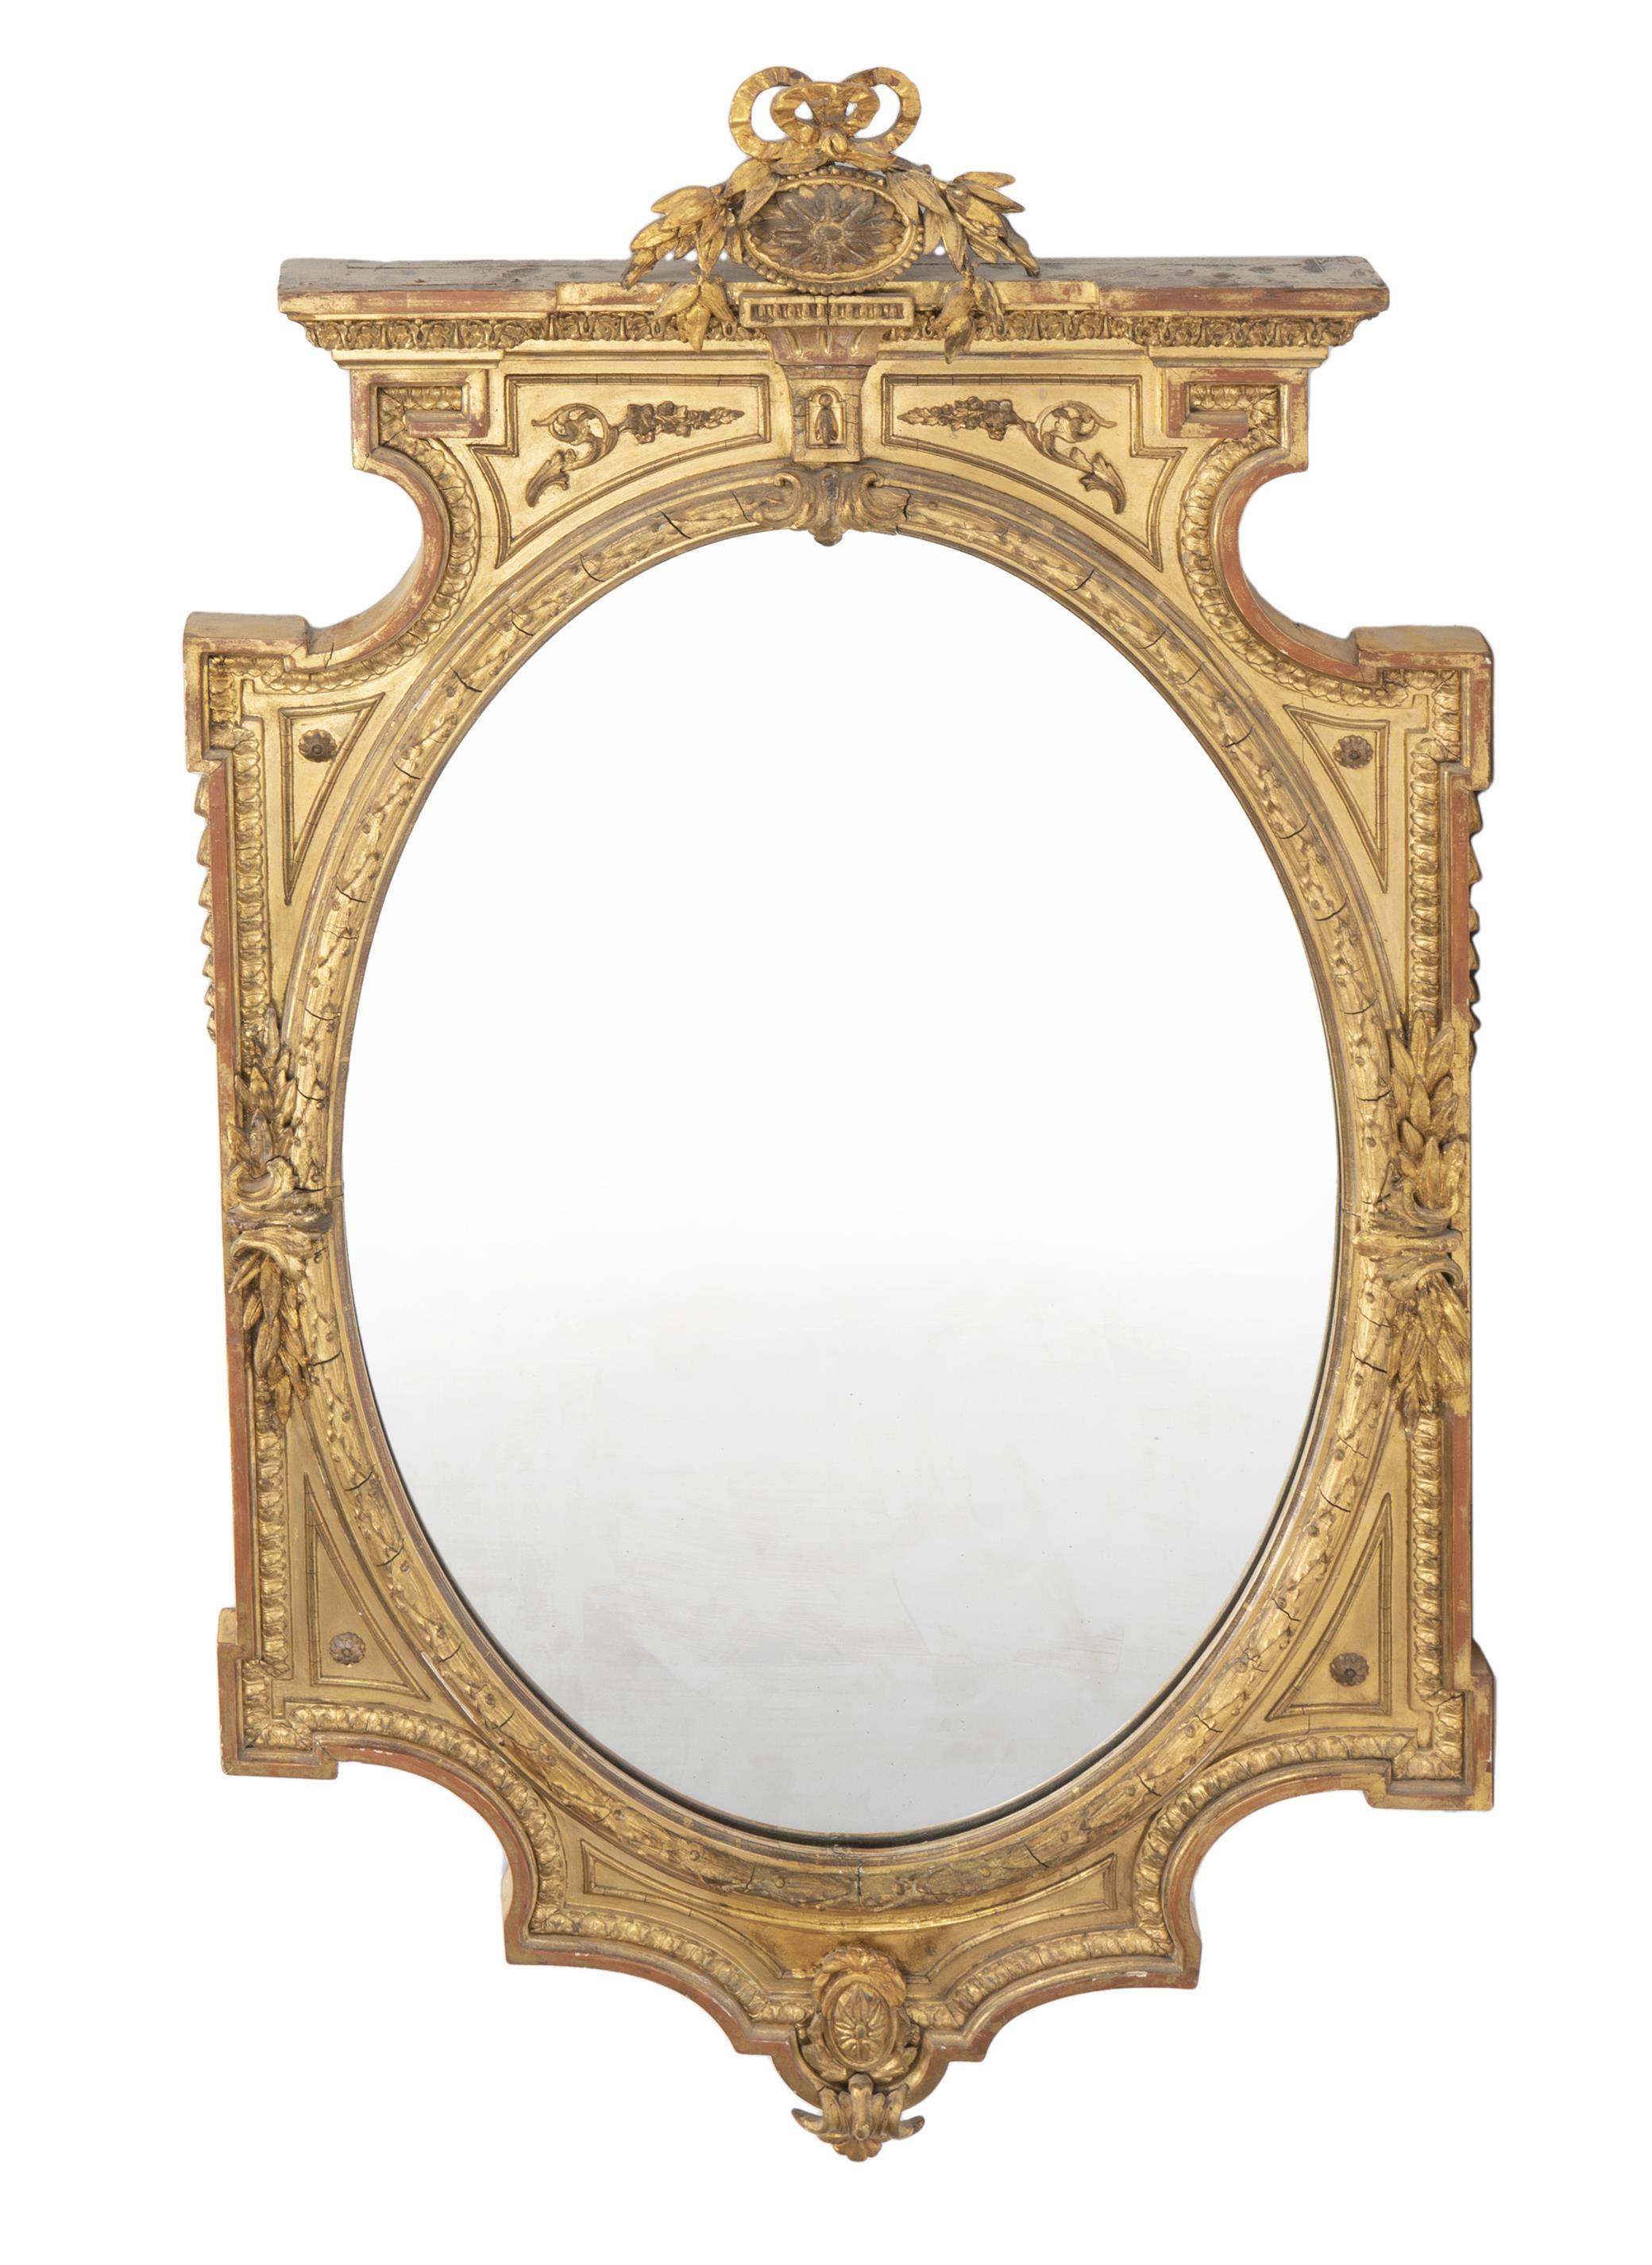 Italian Neoclassical-Style Carved and Gilt Mirror, 19th Century